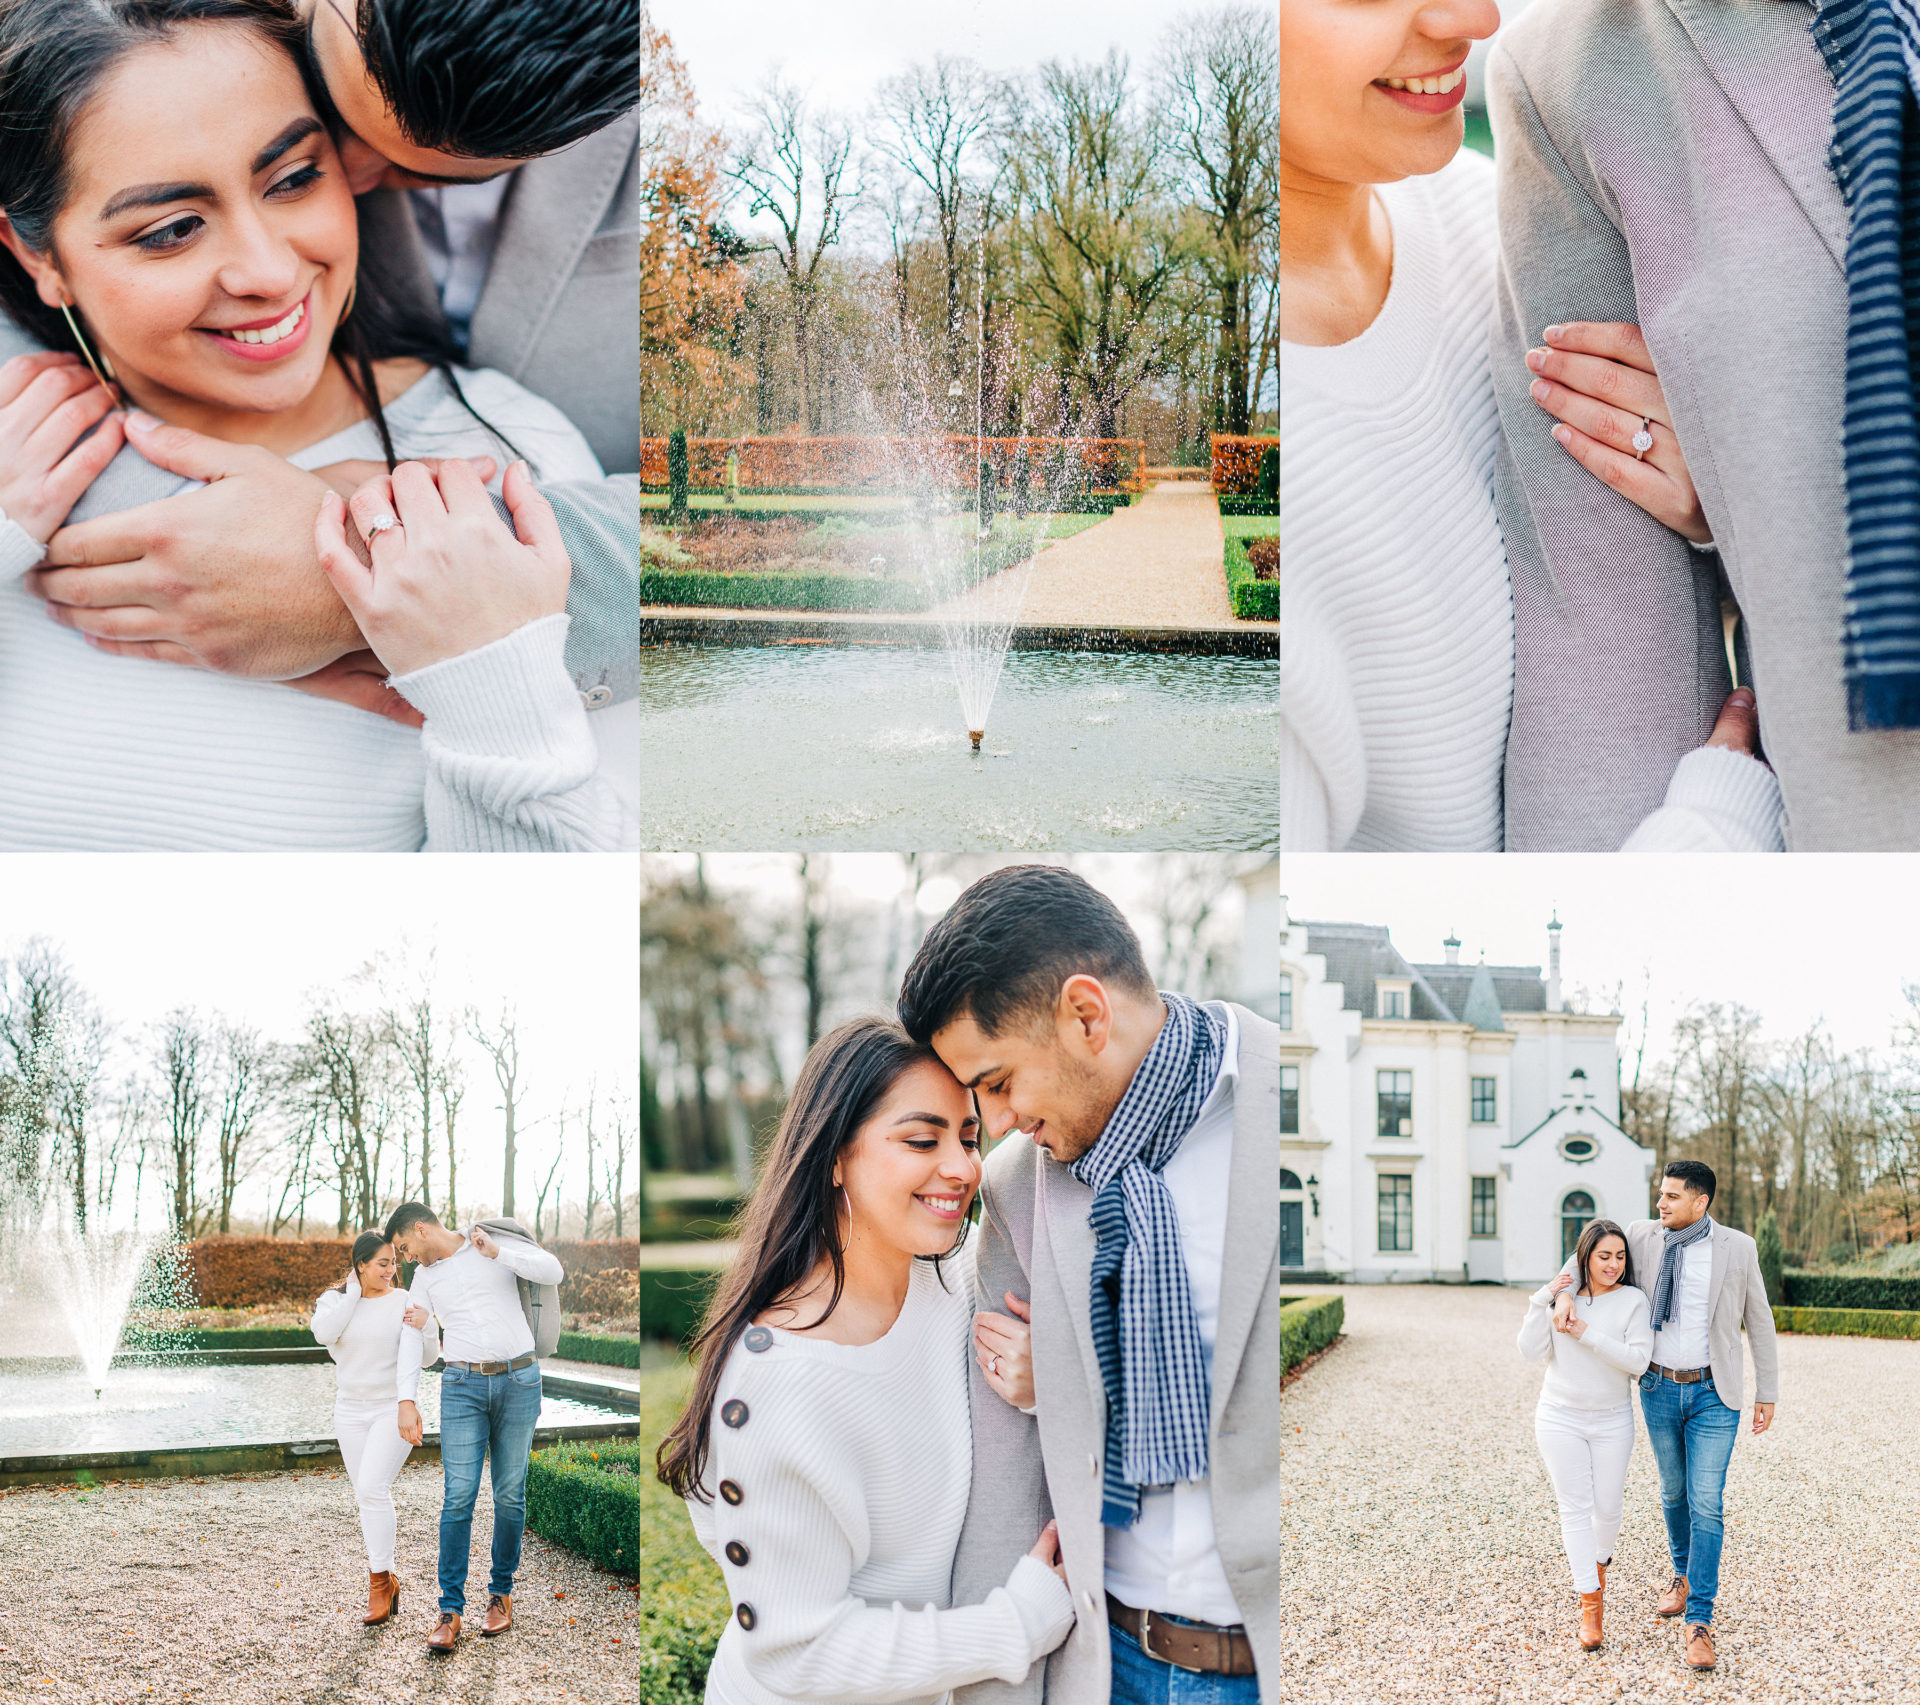 LauraandRyanPrevew-1-1920x1705 How to Choose the Right Location for Your Couple Photo Session Engagement How-to 